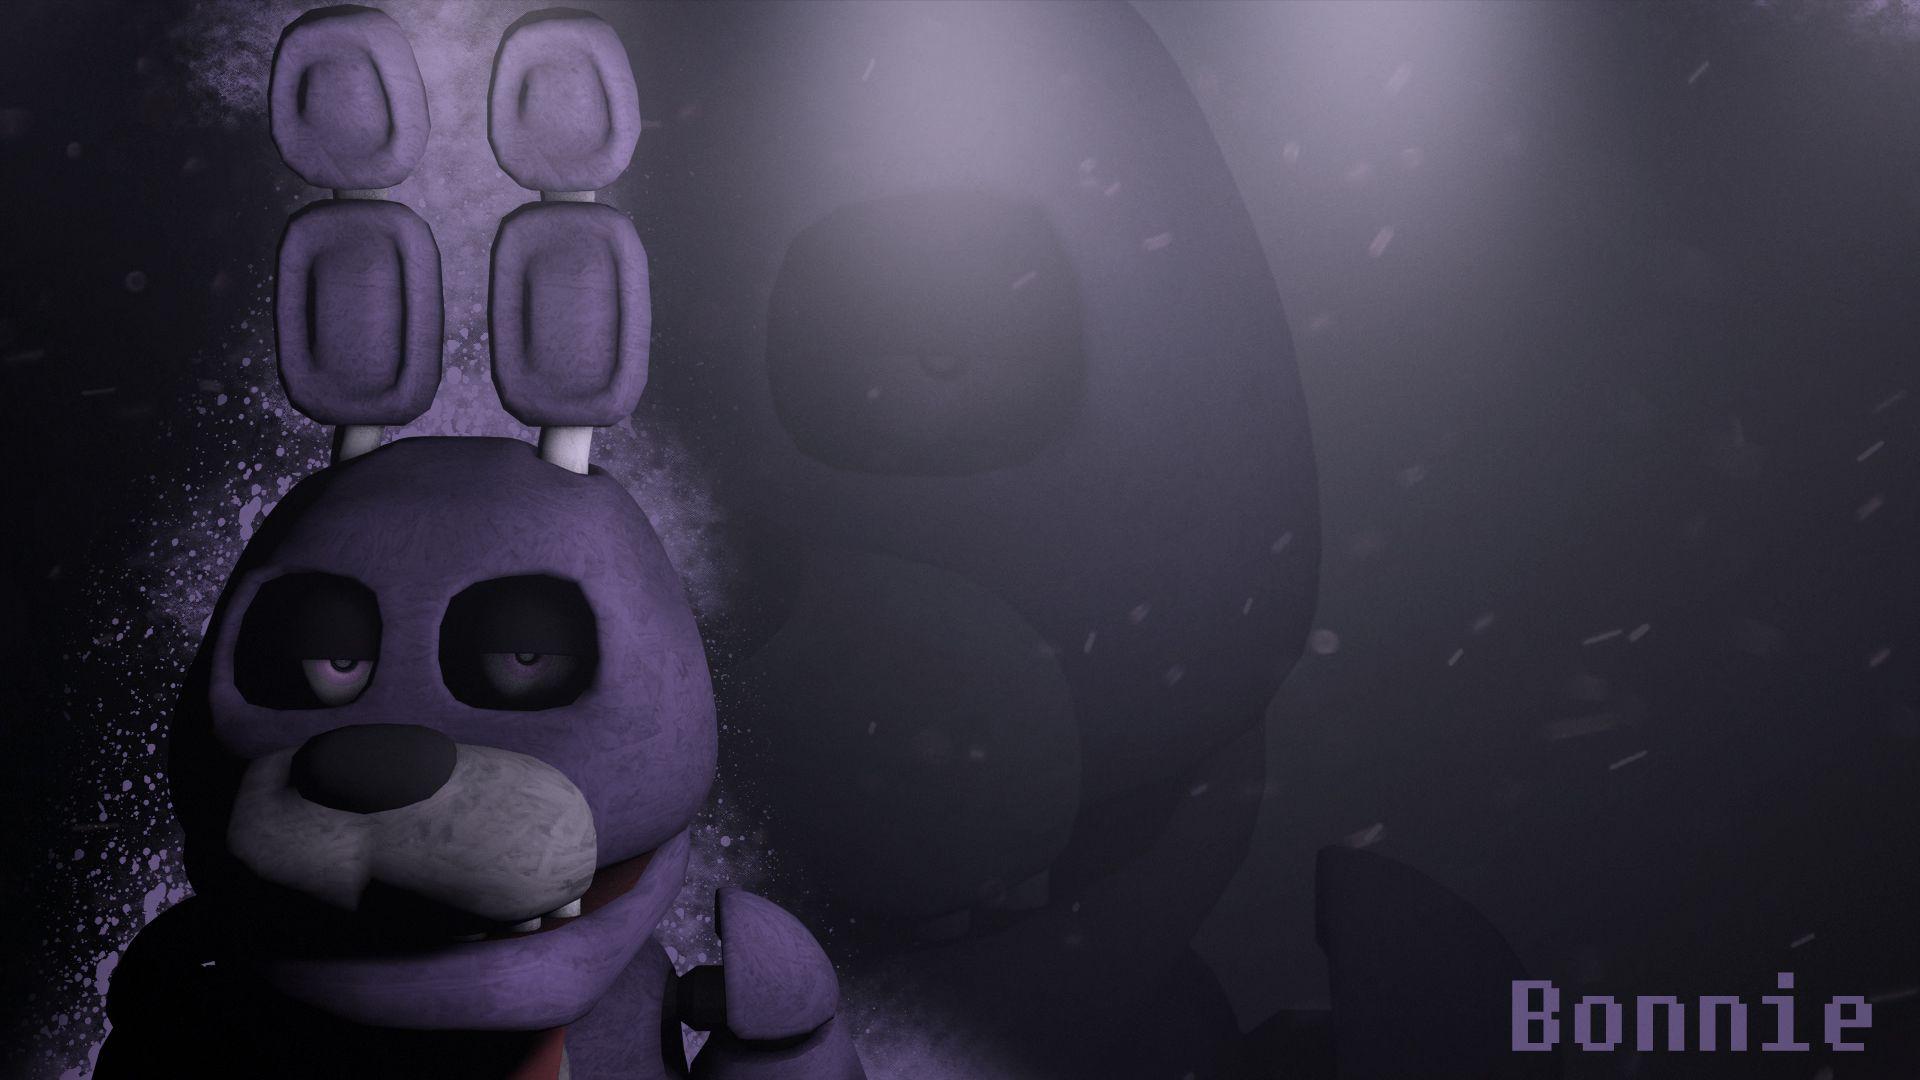 Five Nights at Freddy's Bonnie Wallpaper DOWNLOAD